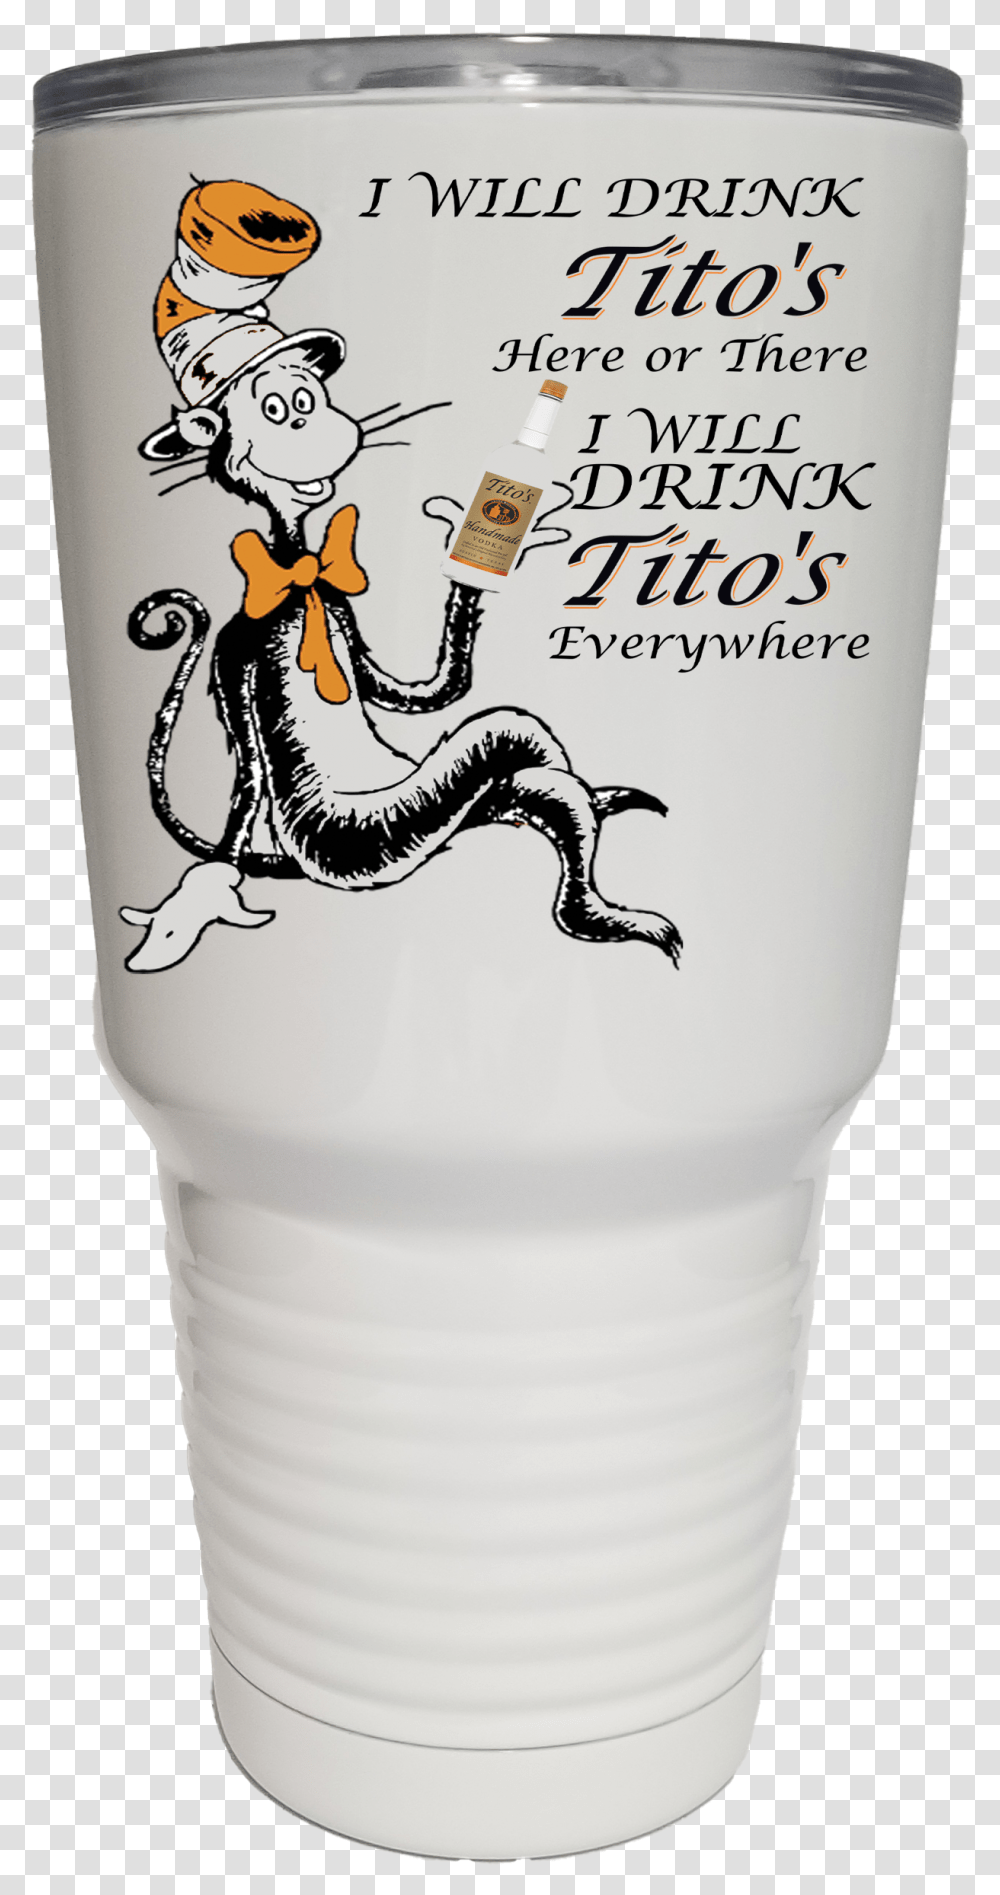 Cat & The Hat With Tito's New 30oz Tumbler Pint Glass, Bottle, Bird, Animal, Alcohol Transparent Png